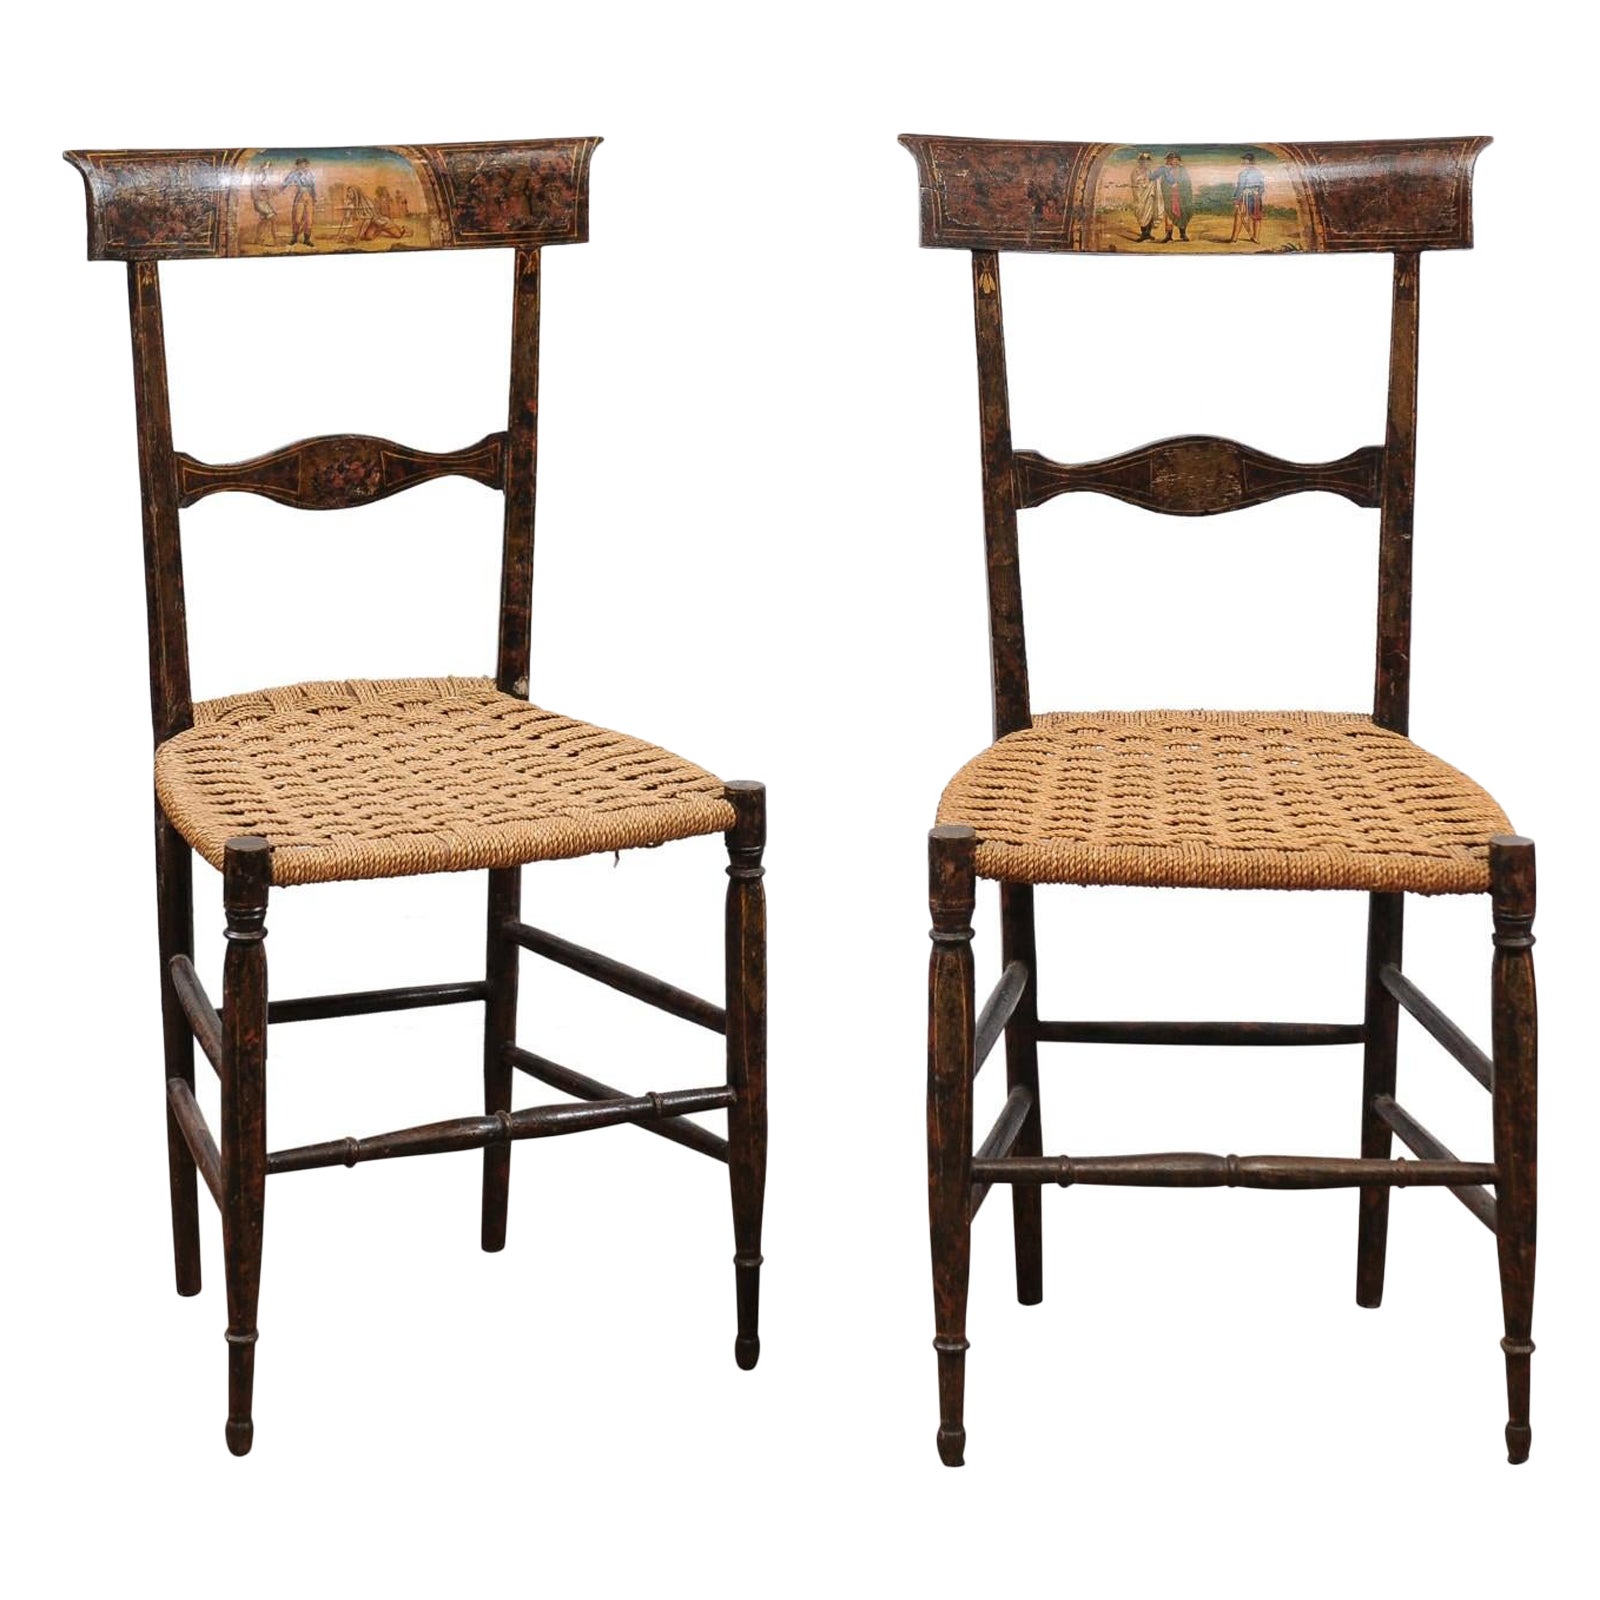 Pair of Neoclassical Black Painted Side Chairs with Woven Seats, Italy ca. 1790 For Sale